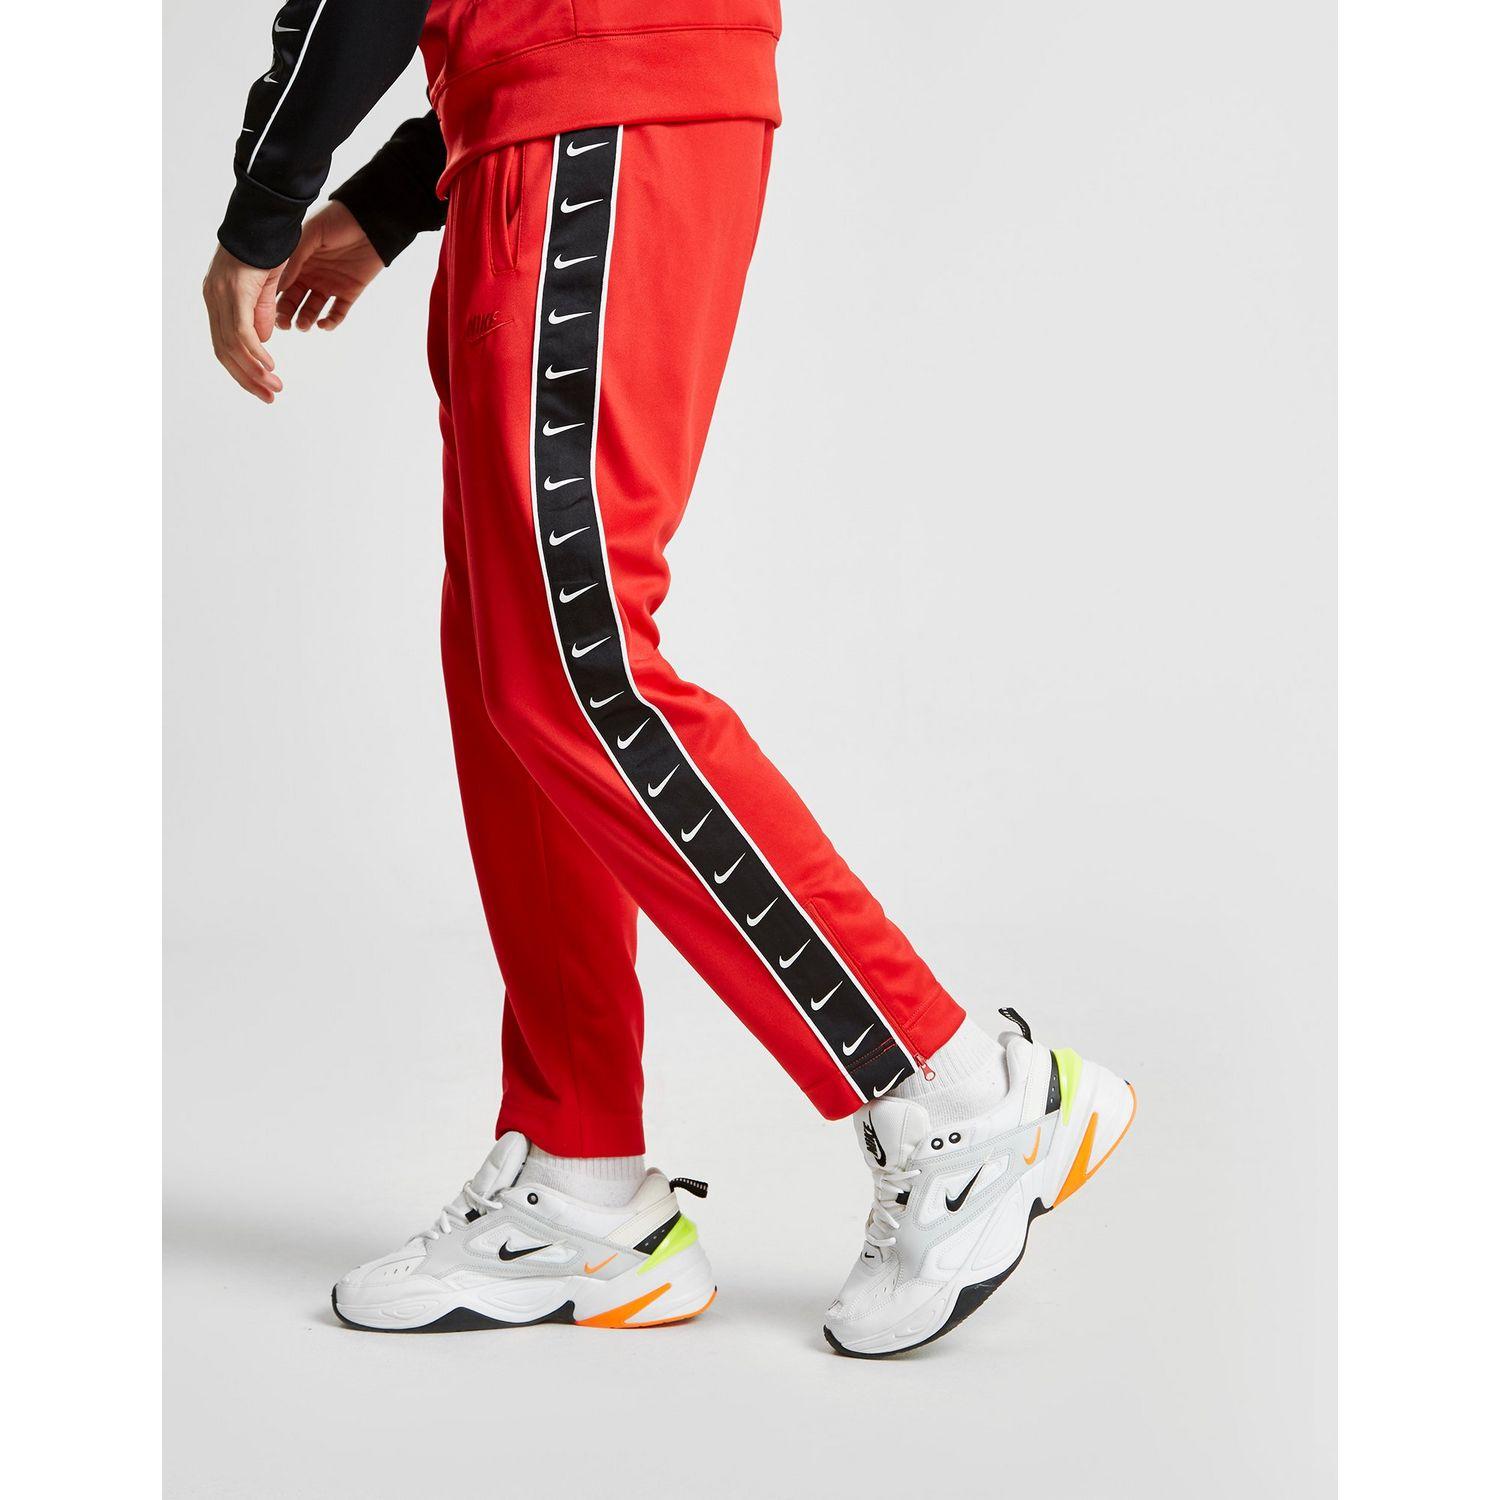 Nike Synthetic Tape Track Pants in Red/Black/White (Red) for Men - Lyst